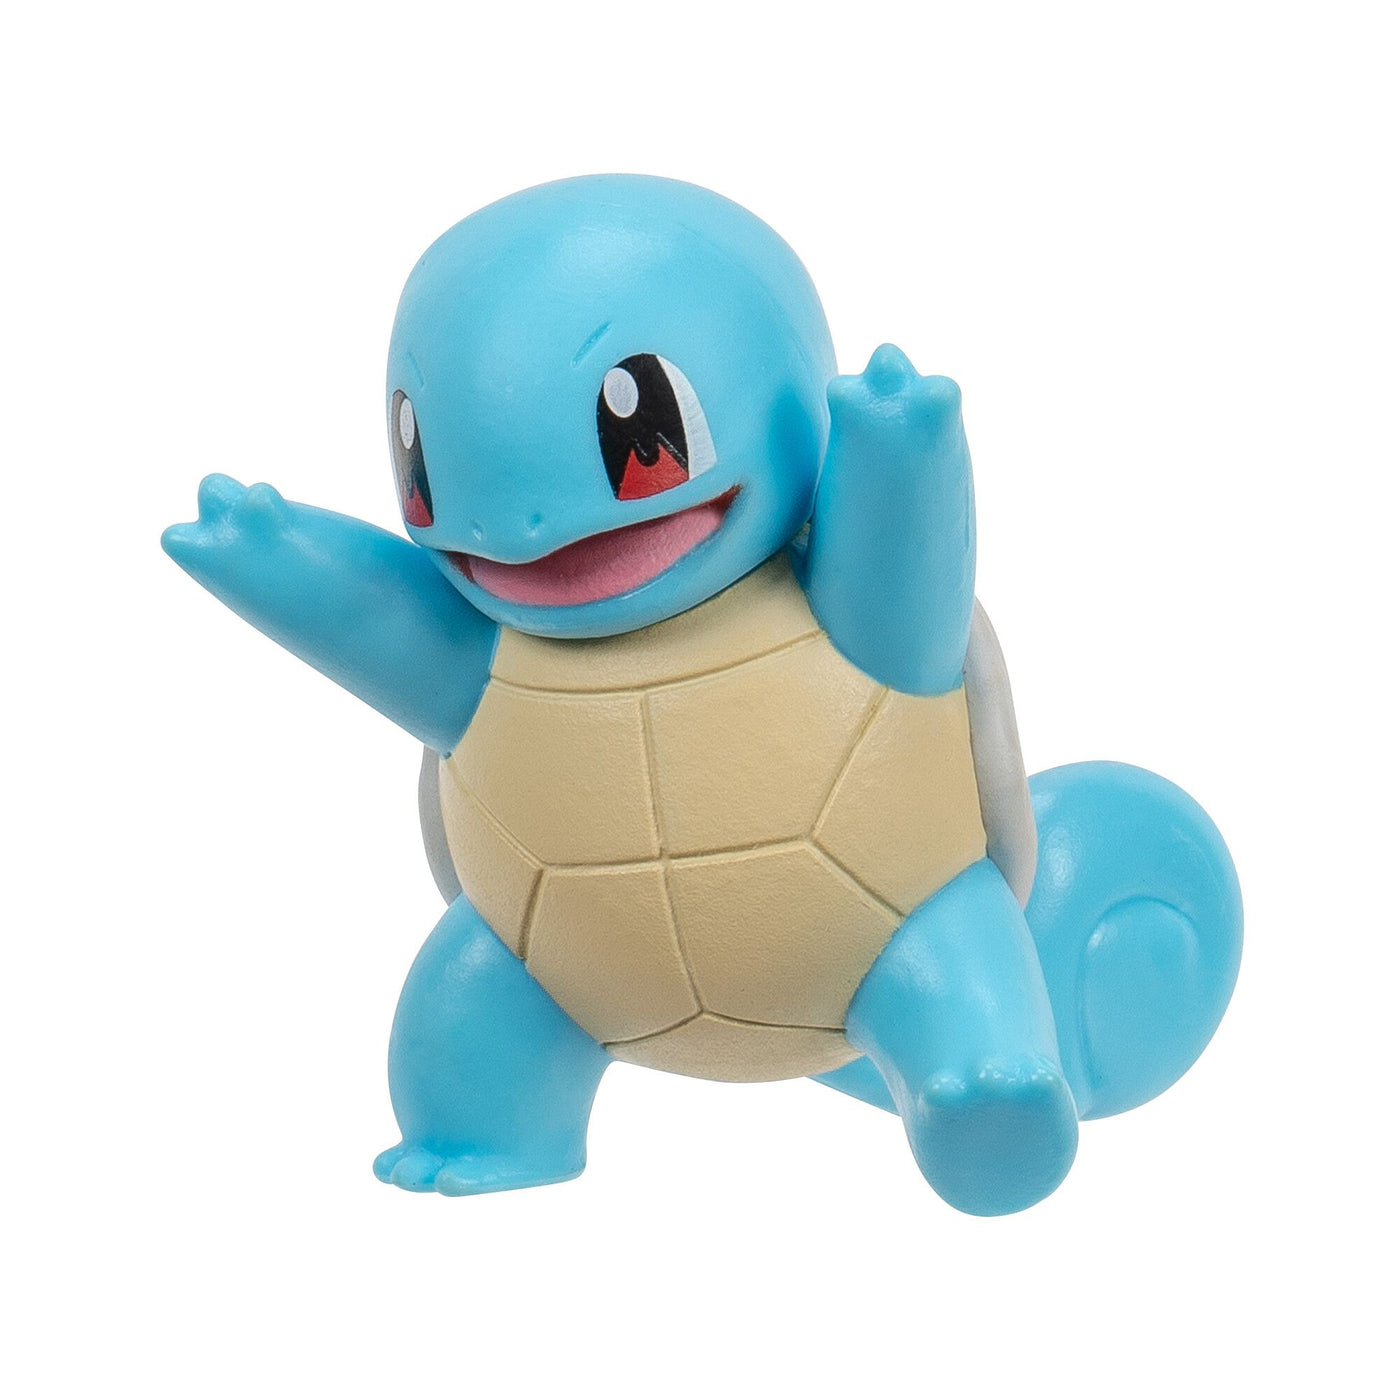 Pokemon Select 2" Display Case Battle Figure - Squirtle